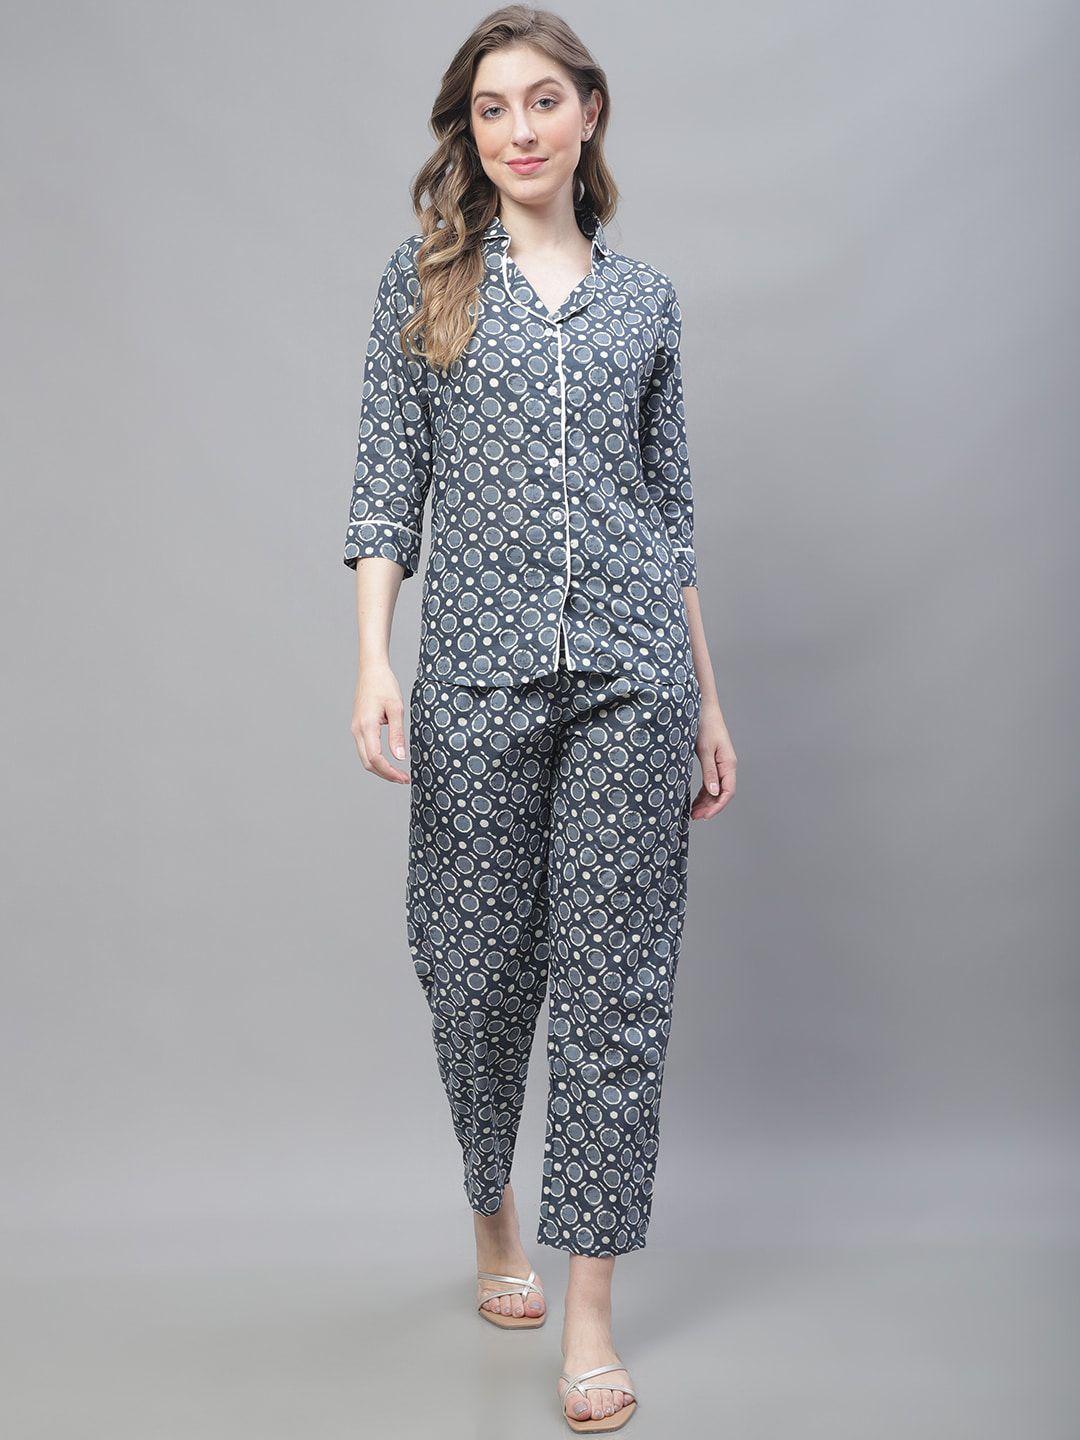 tag 7 polka dots printed pure cotton night suit